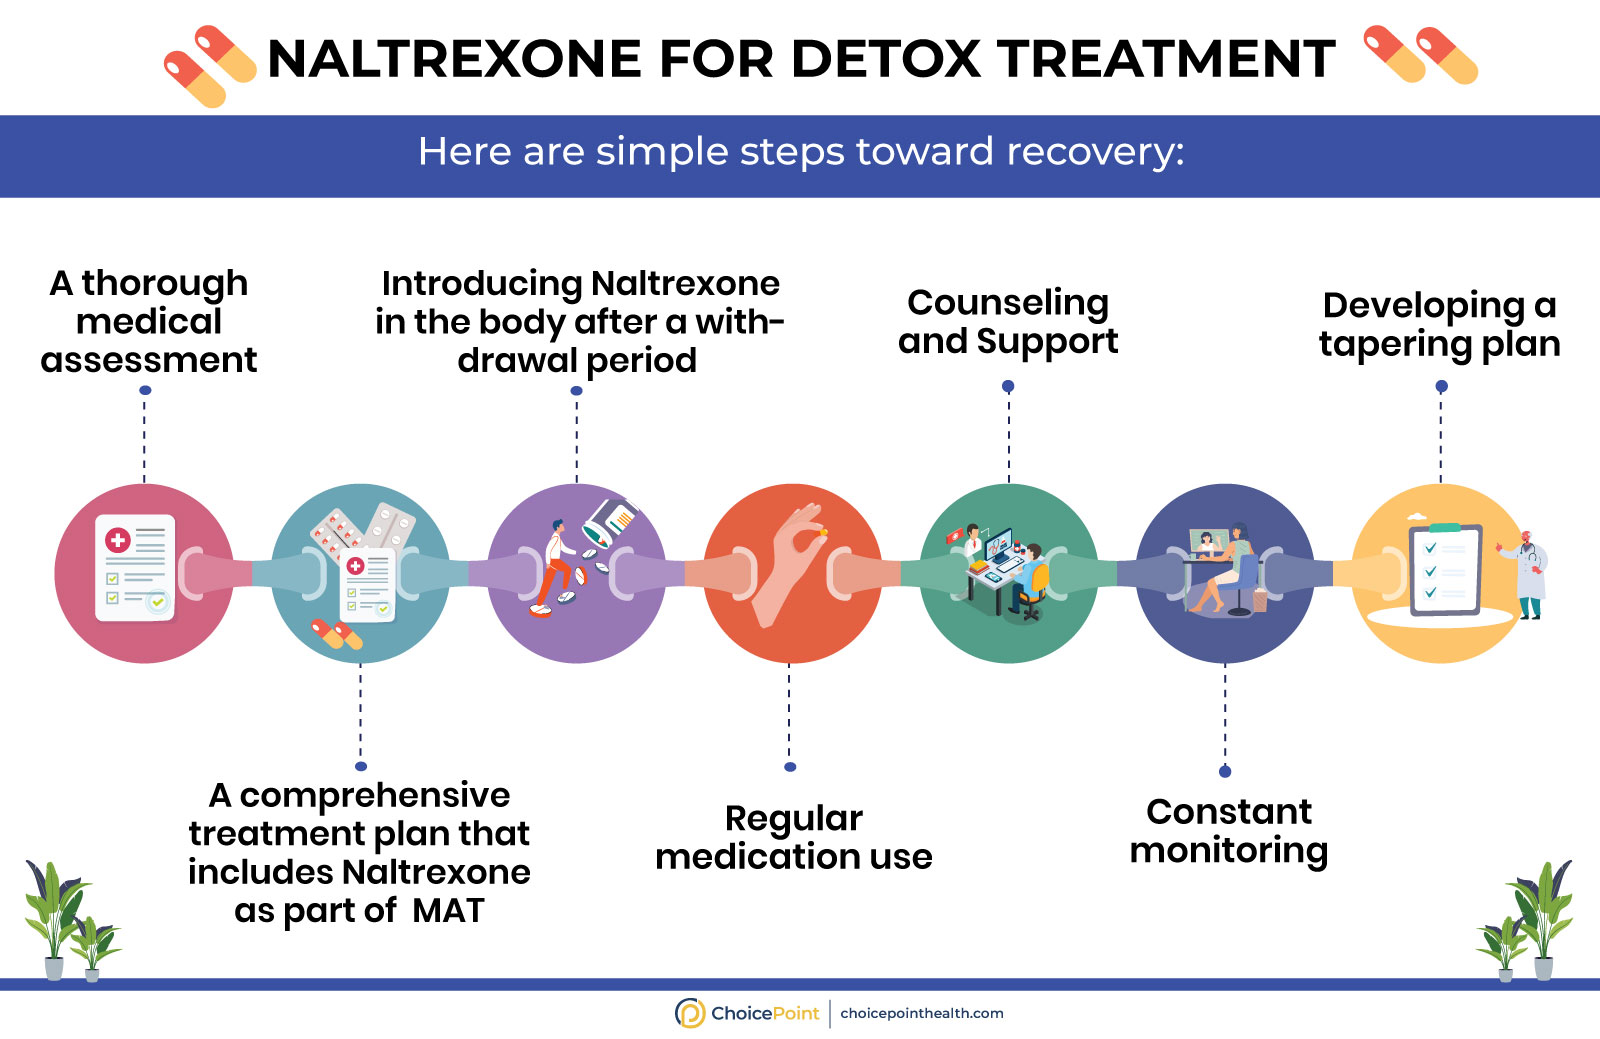 How Is Naltrexone Used During Drug Detox?